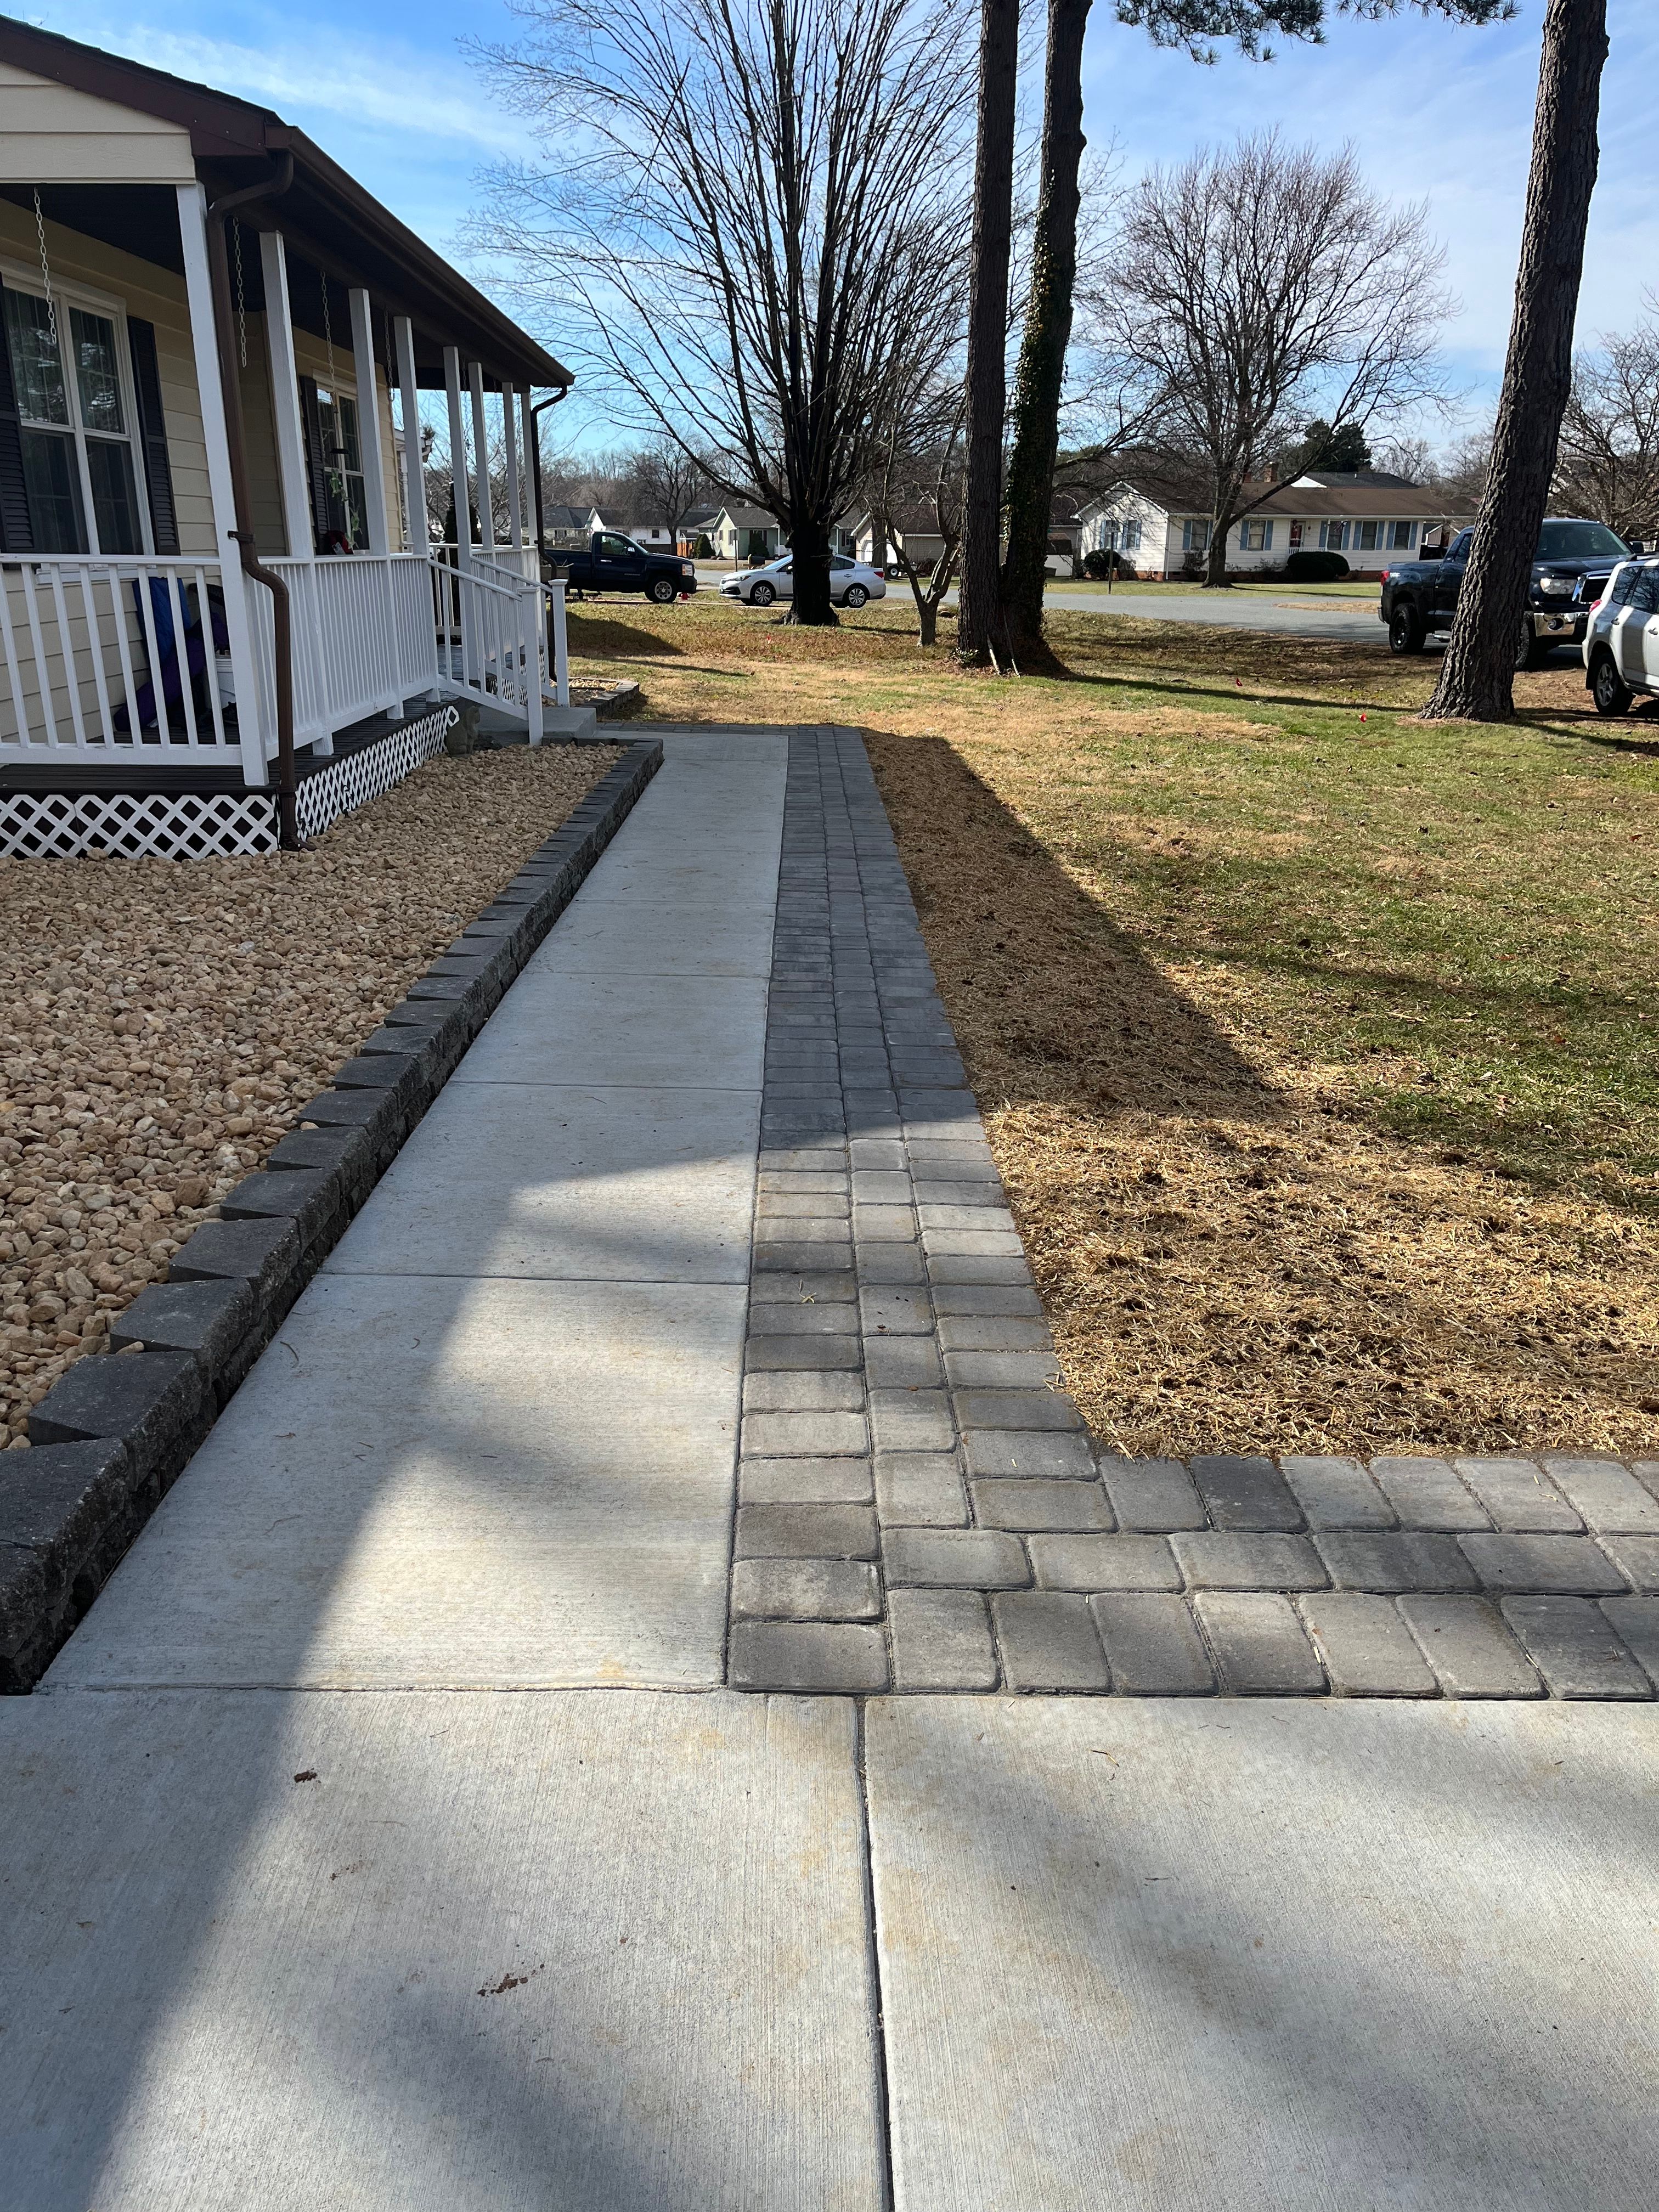 Hardscaping for C & C Lawn Care Services in Fredericksburg, VA